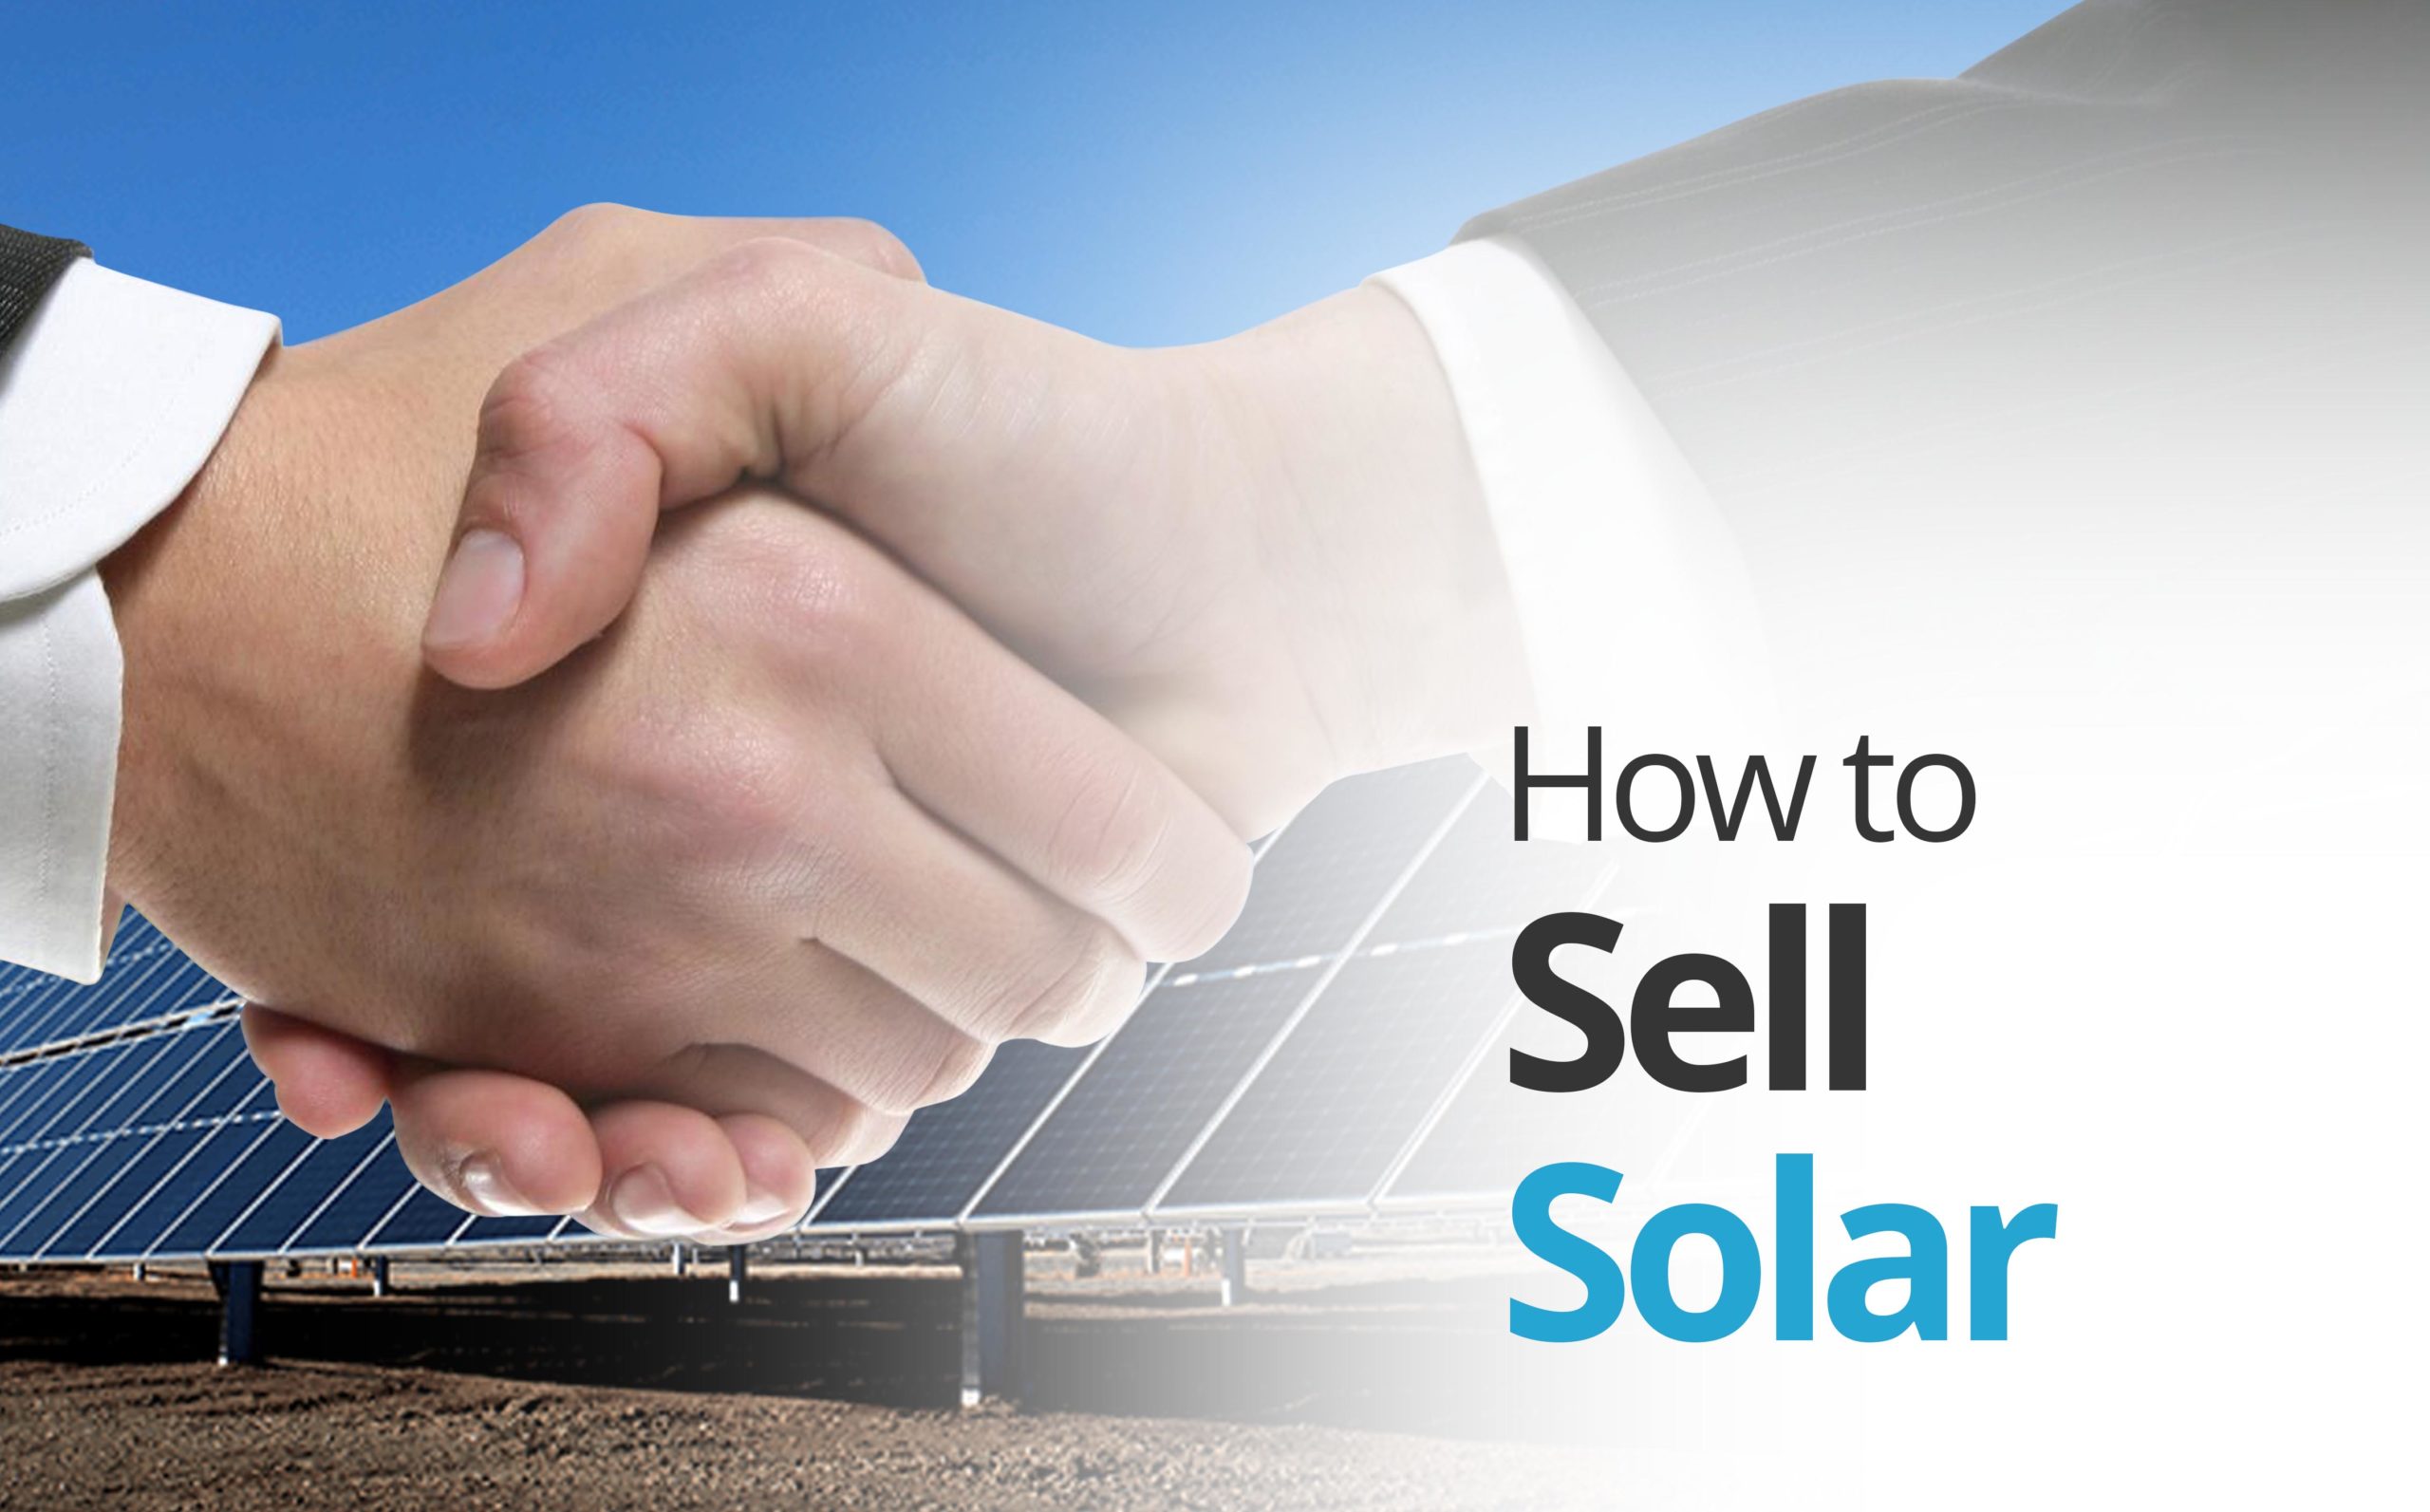 How to Sell Solar